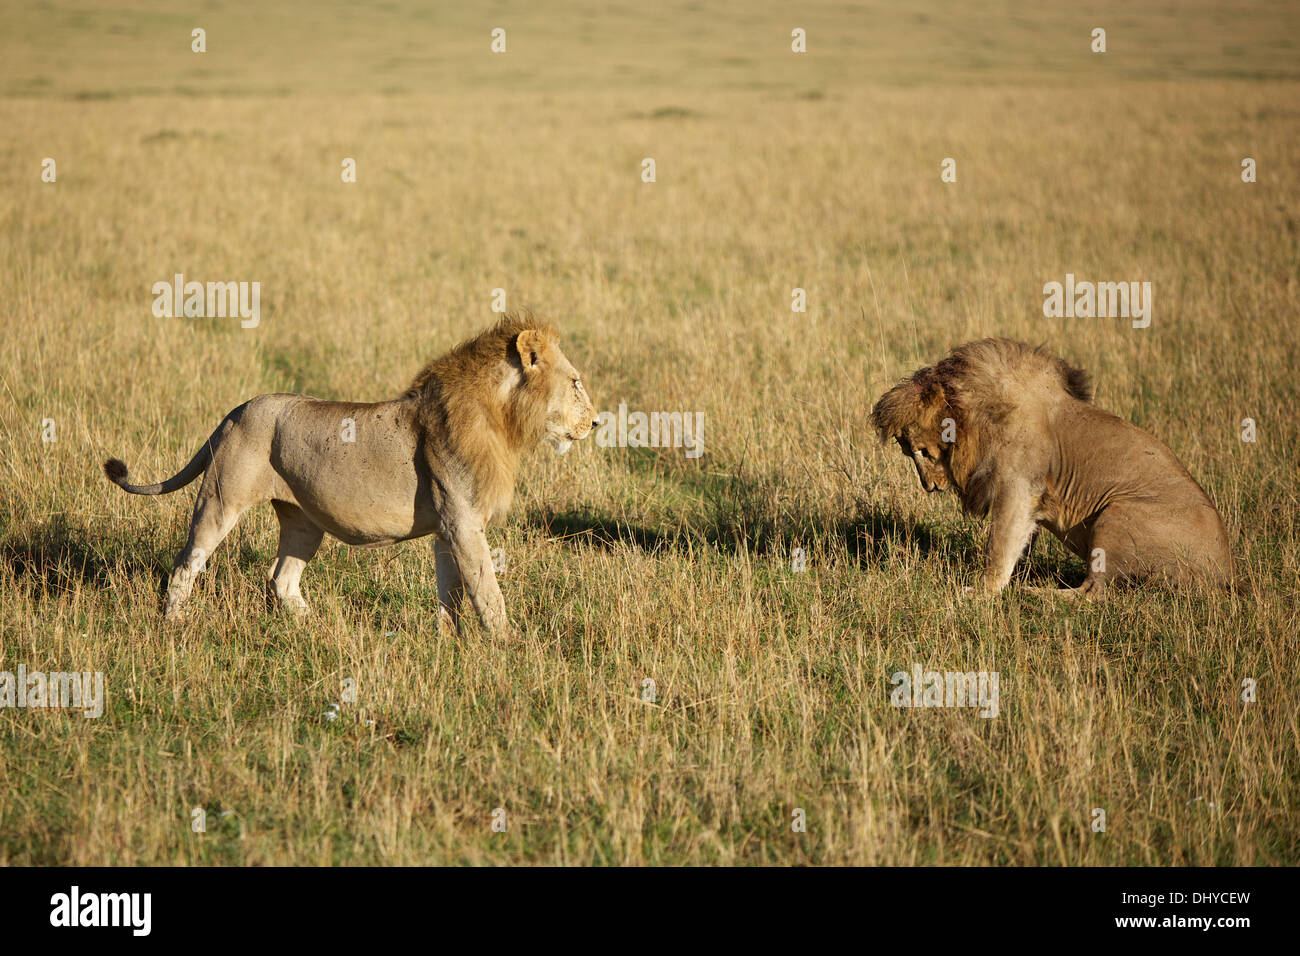 Two male lions size each other up preparing for a fight. The one lions takes a submissive stance Stock Photo